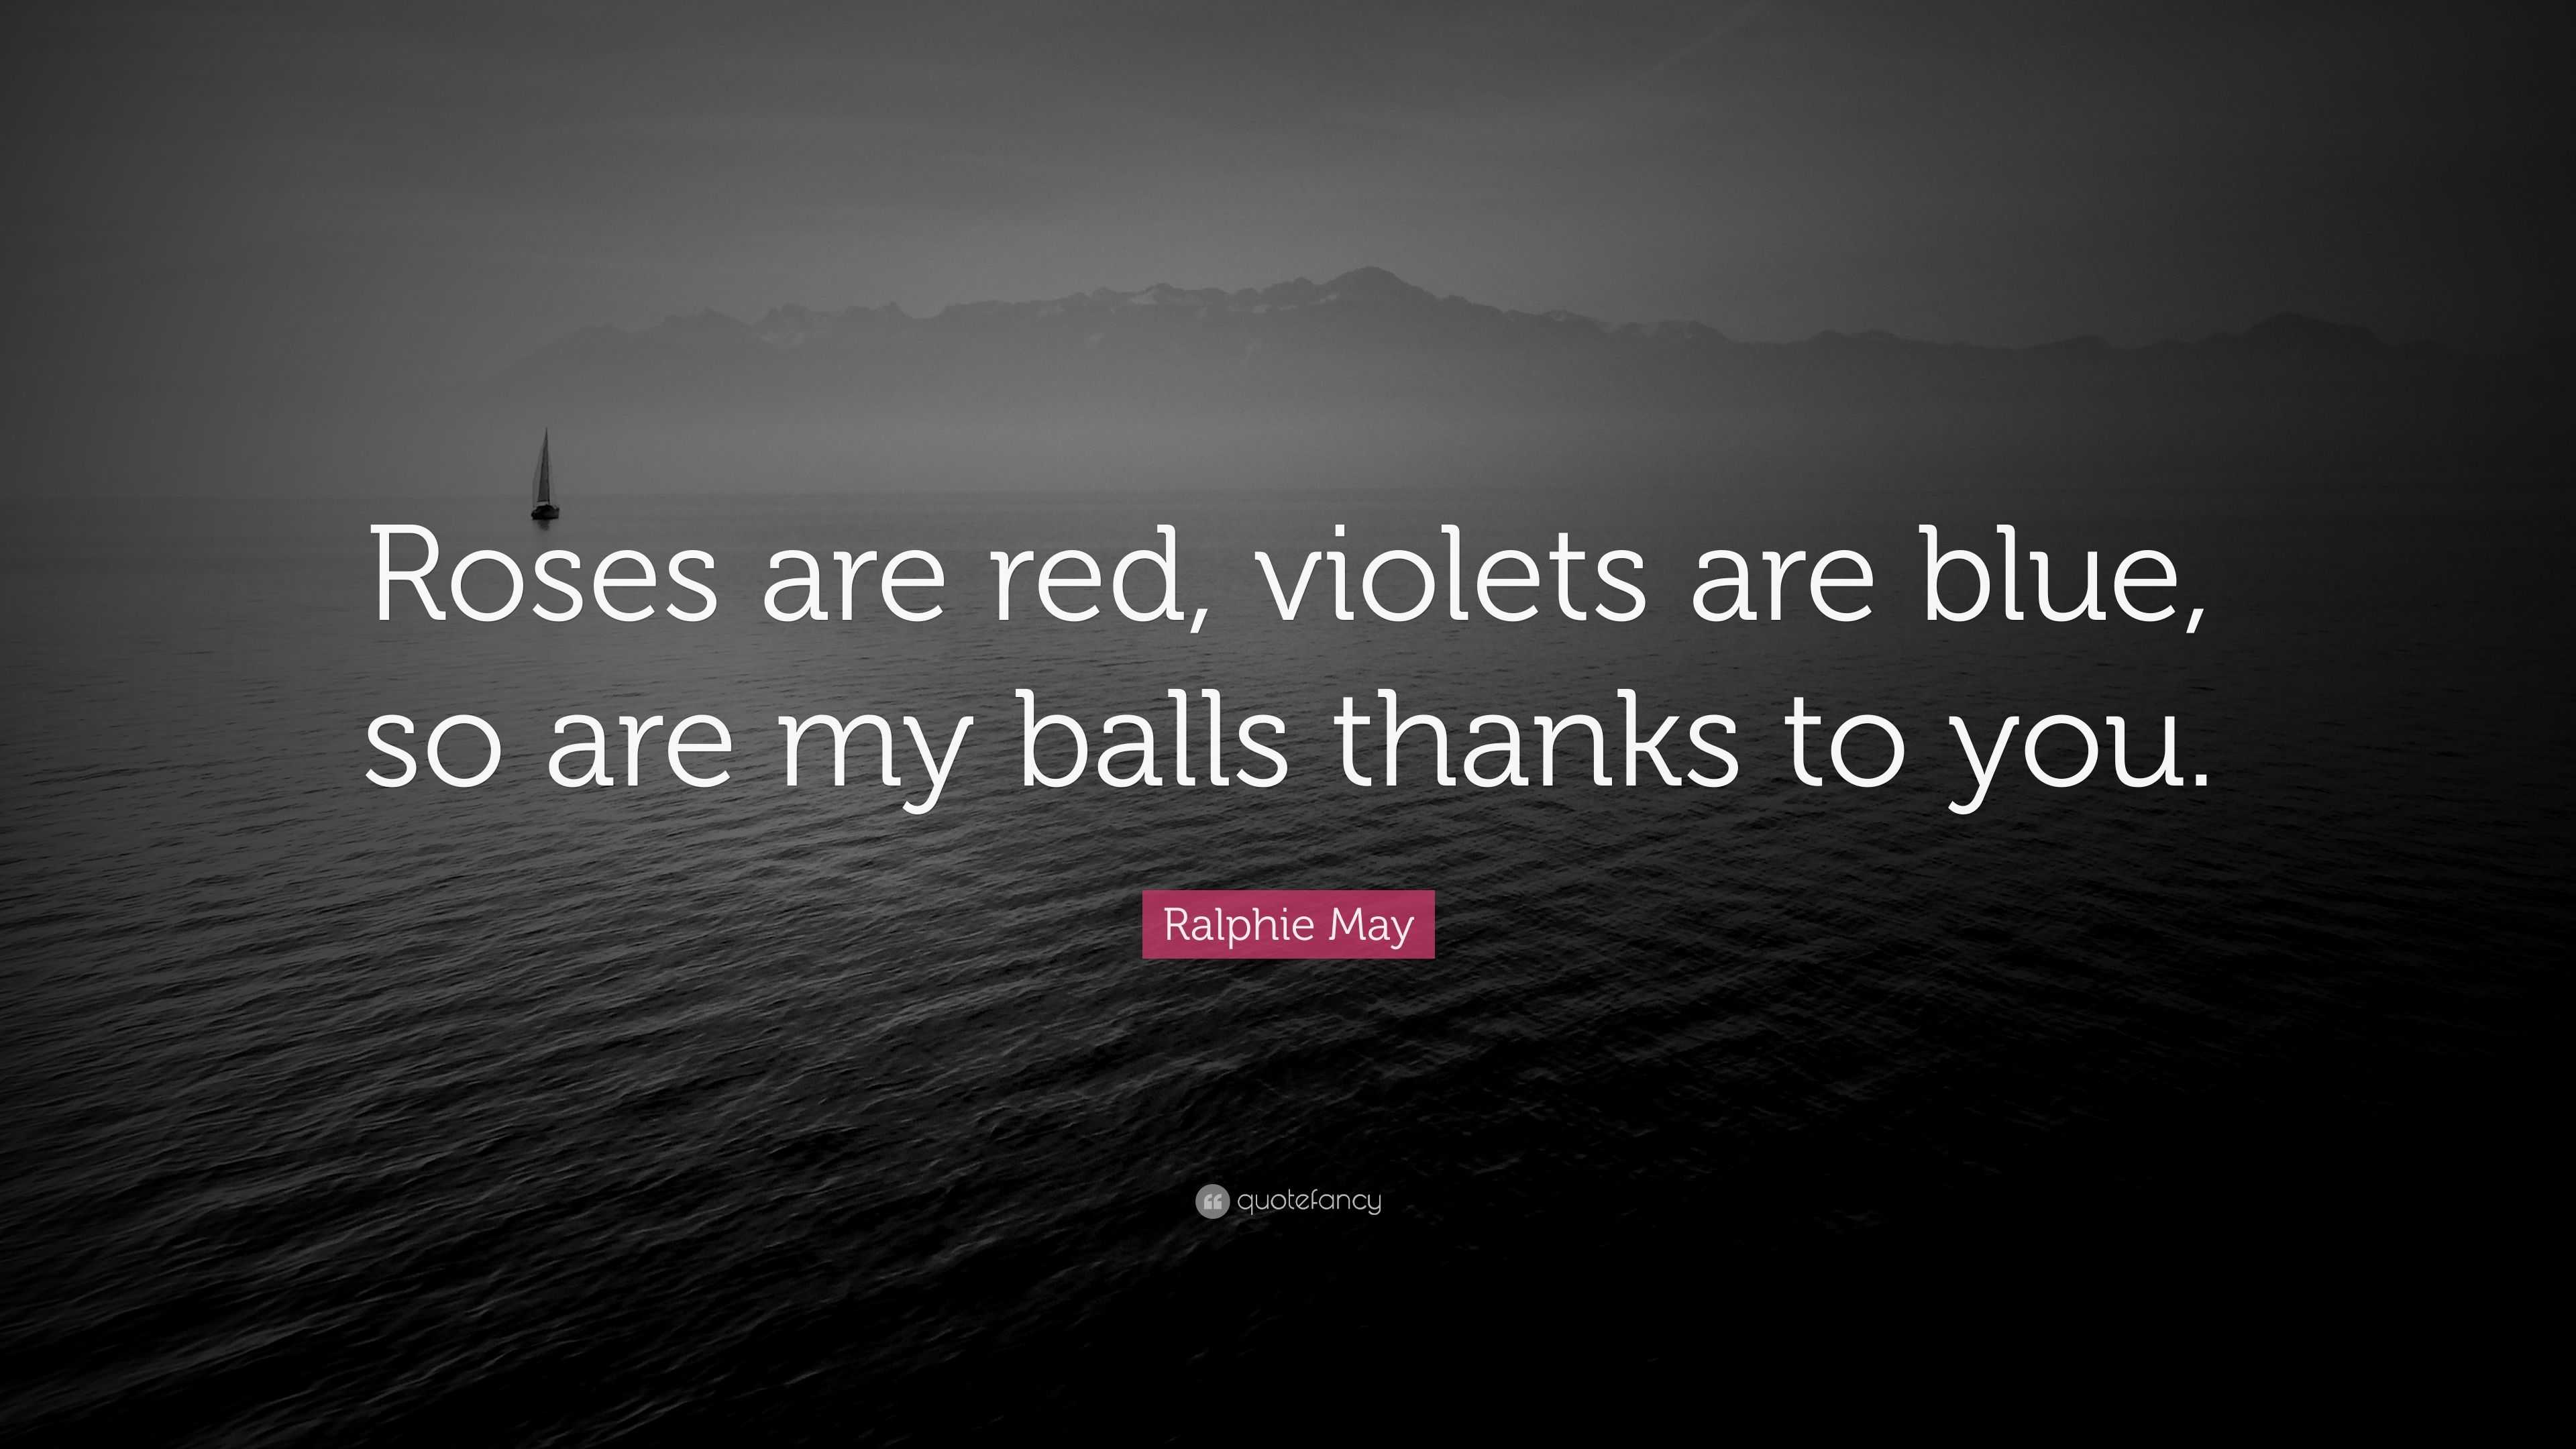 Ralphie May Quote: “Roses red, violets are blue, so are my balls thanks to you.”